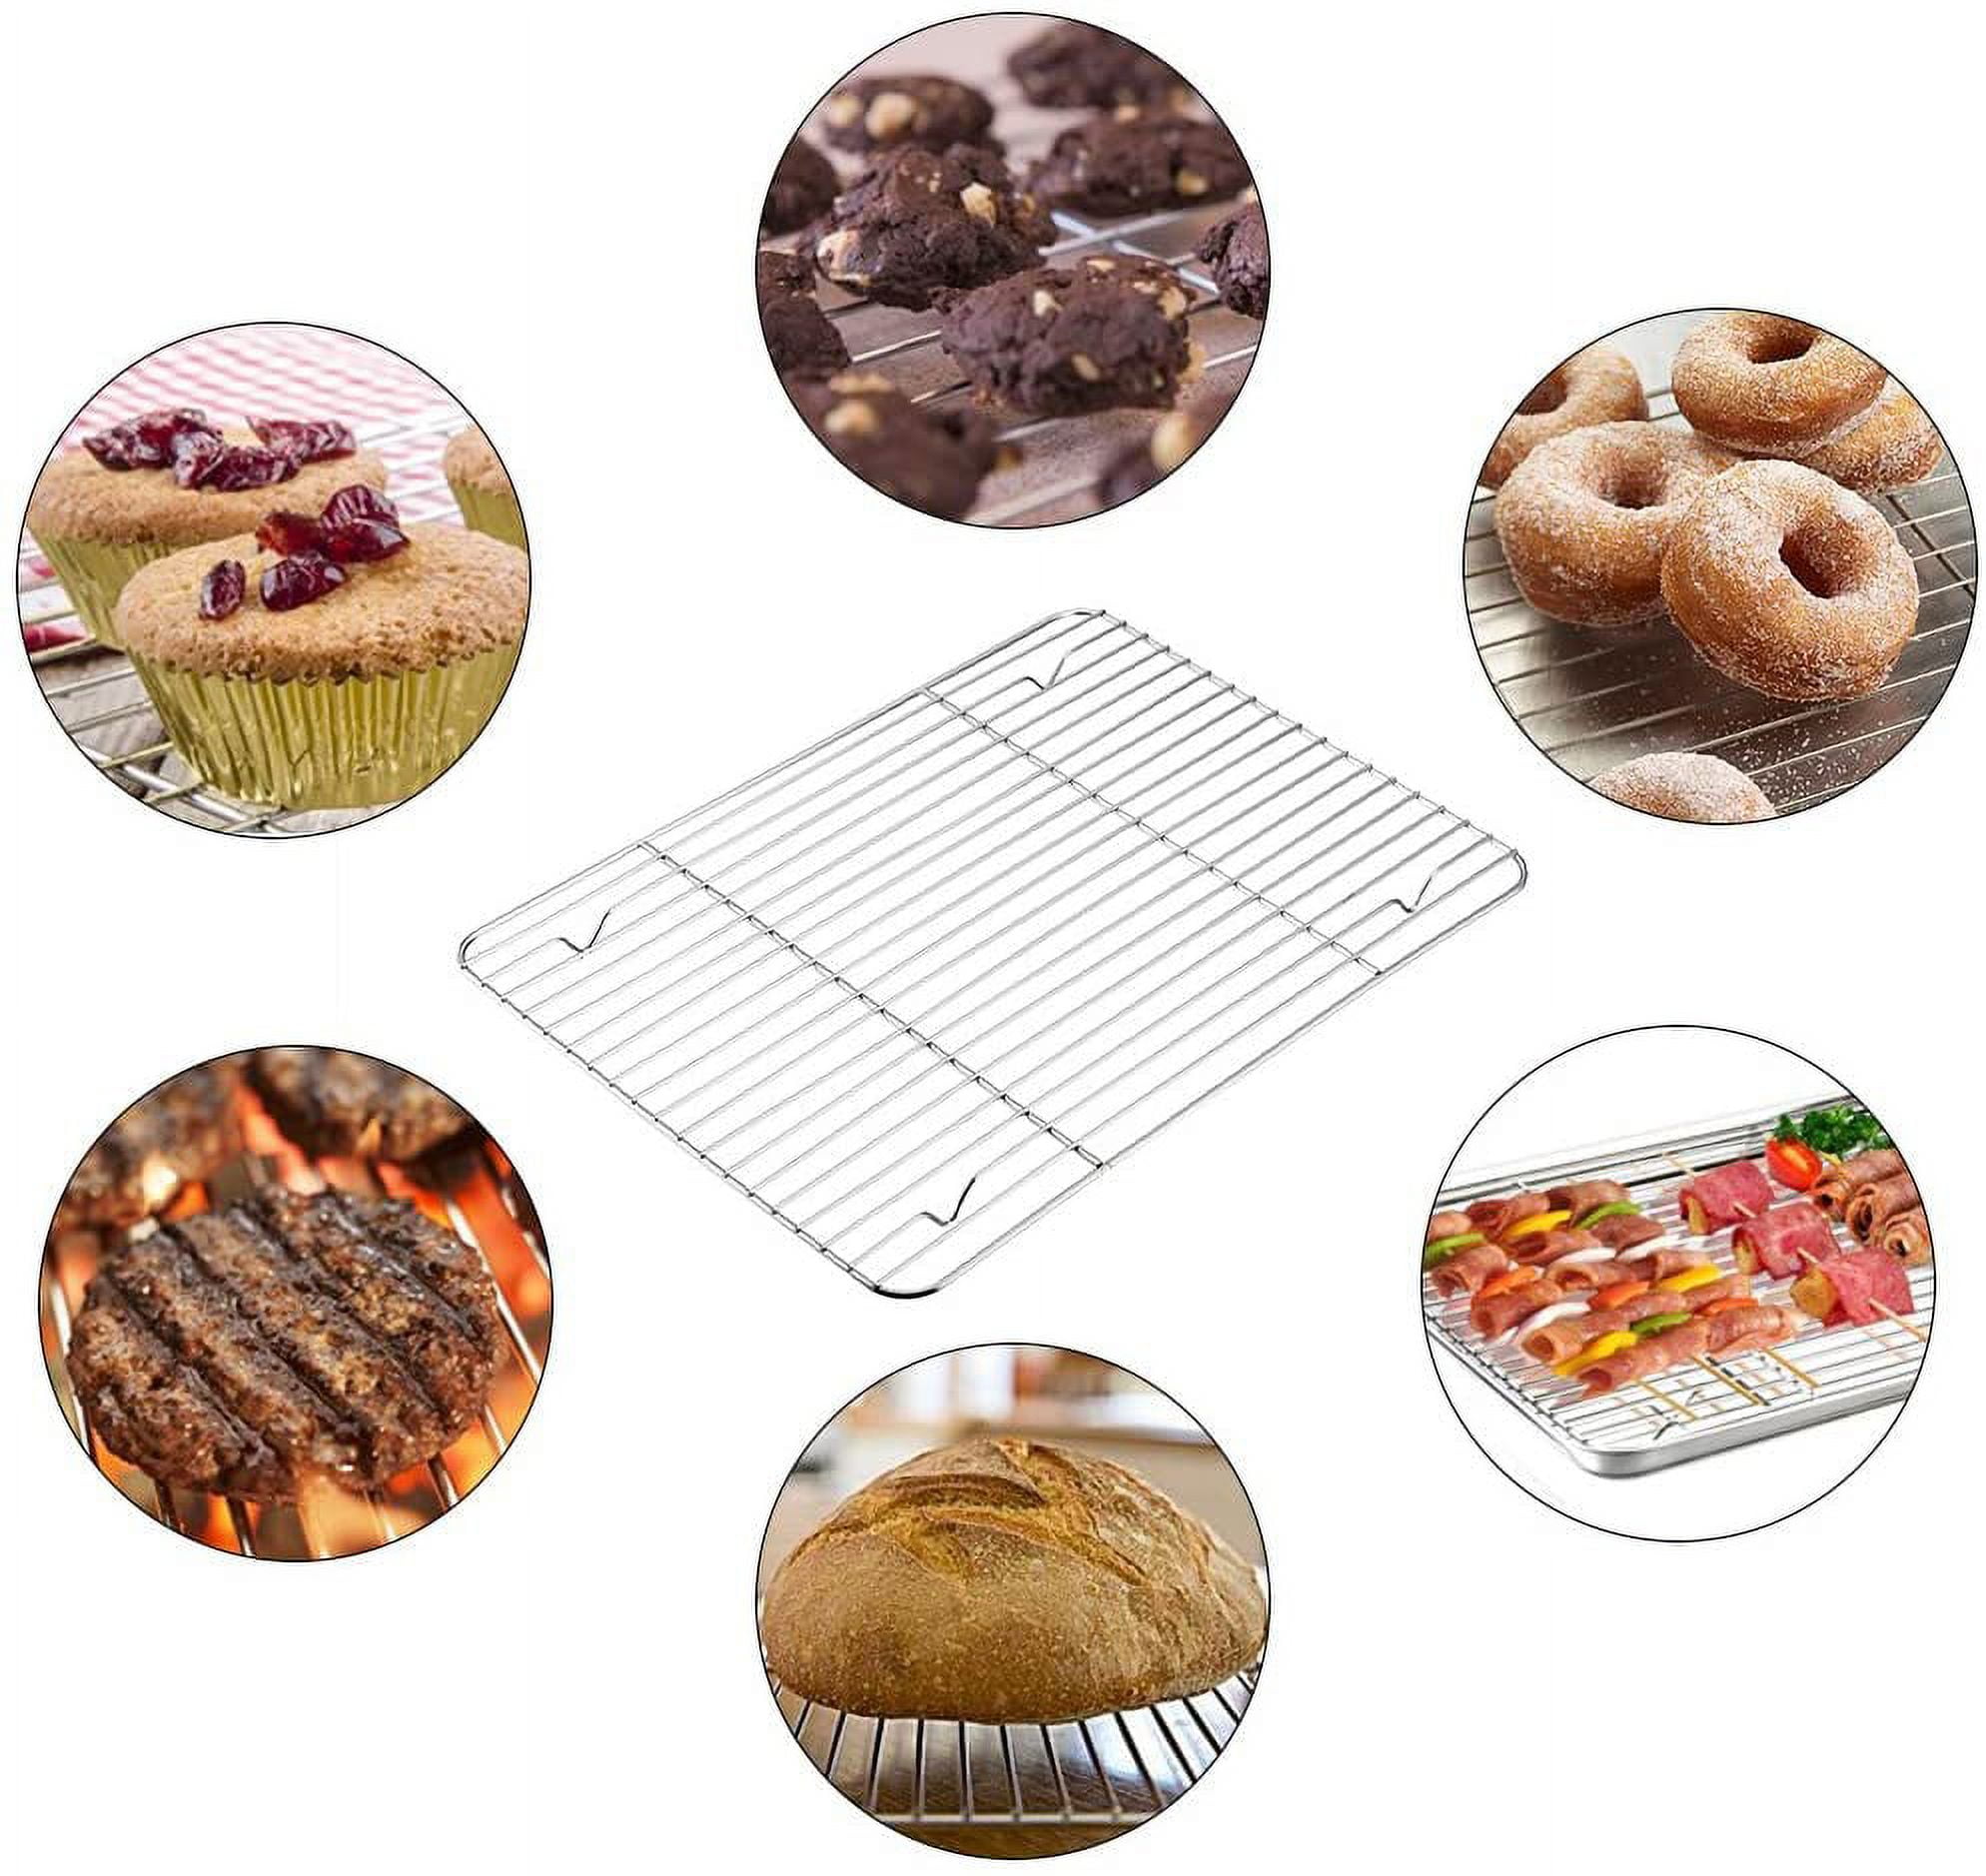 12x10x1 inch 3 Piece/set Stainless Steel Baking Pan Large Cookie Sheet Set  for